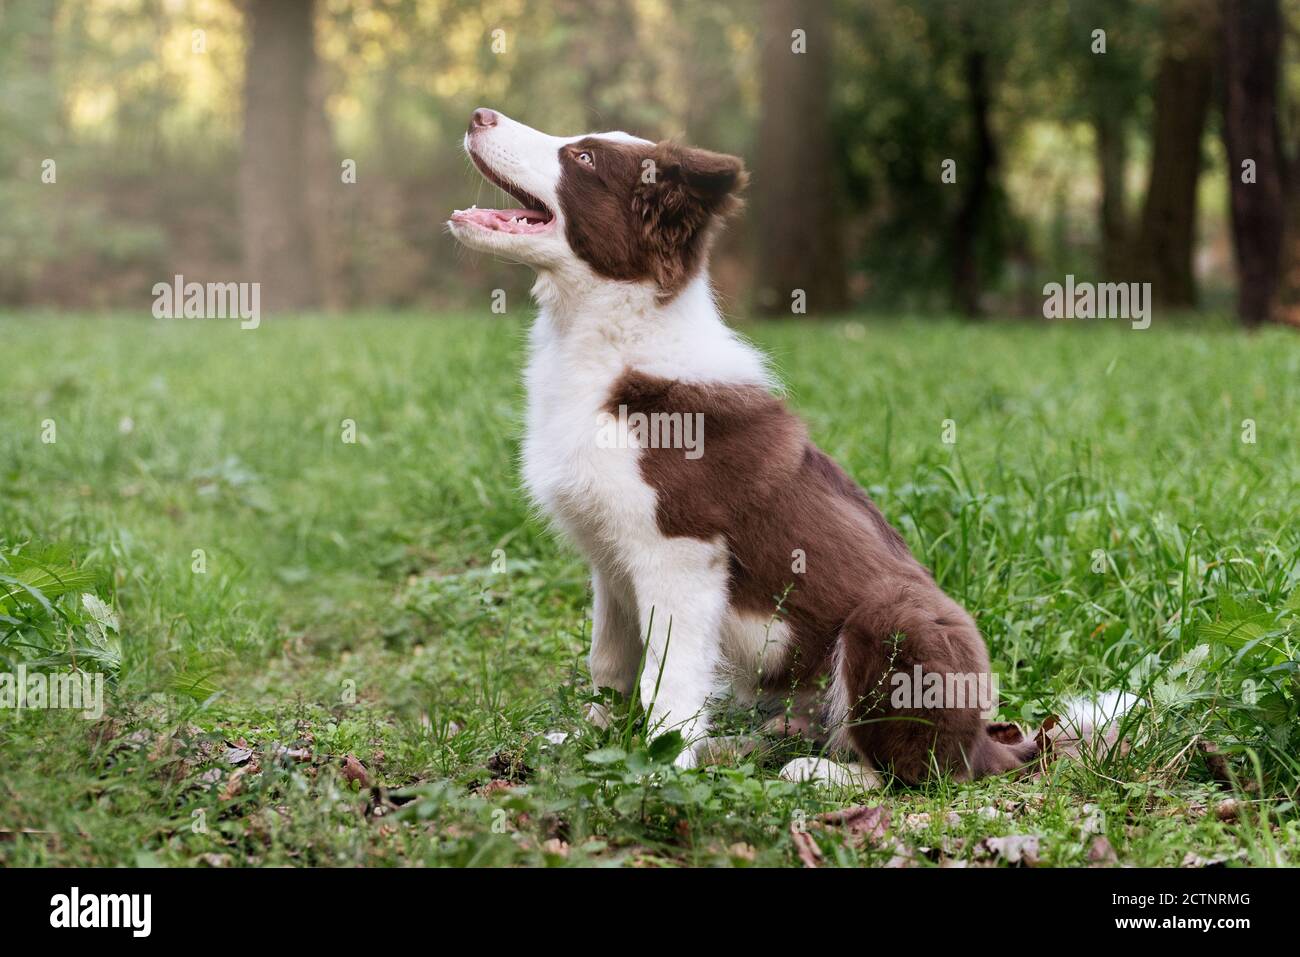 Adorable Border collie puppy sitting on the ground. Four months old cute fluffy puppy in the park. Stock Photo